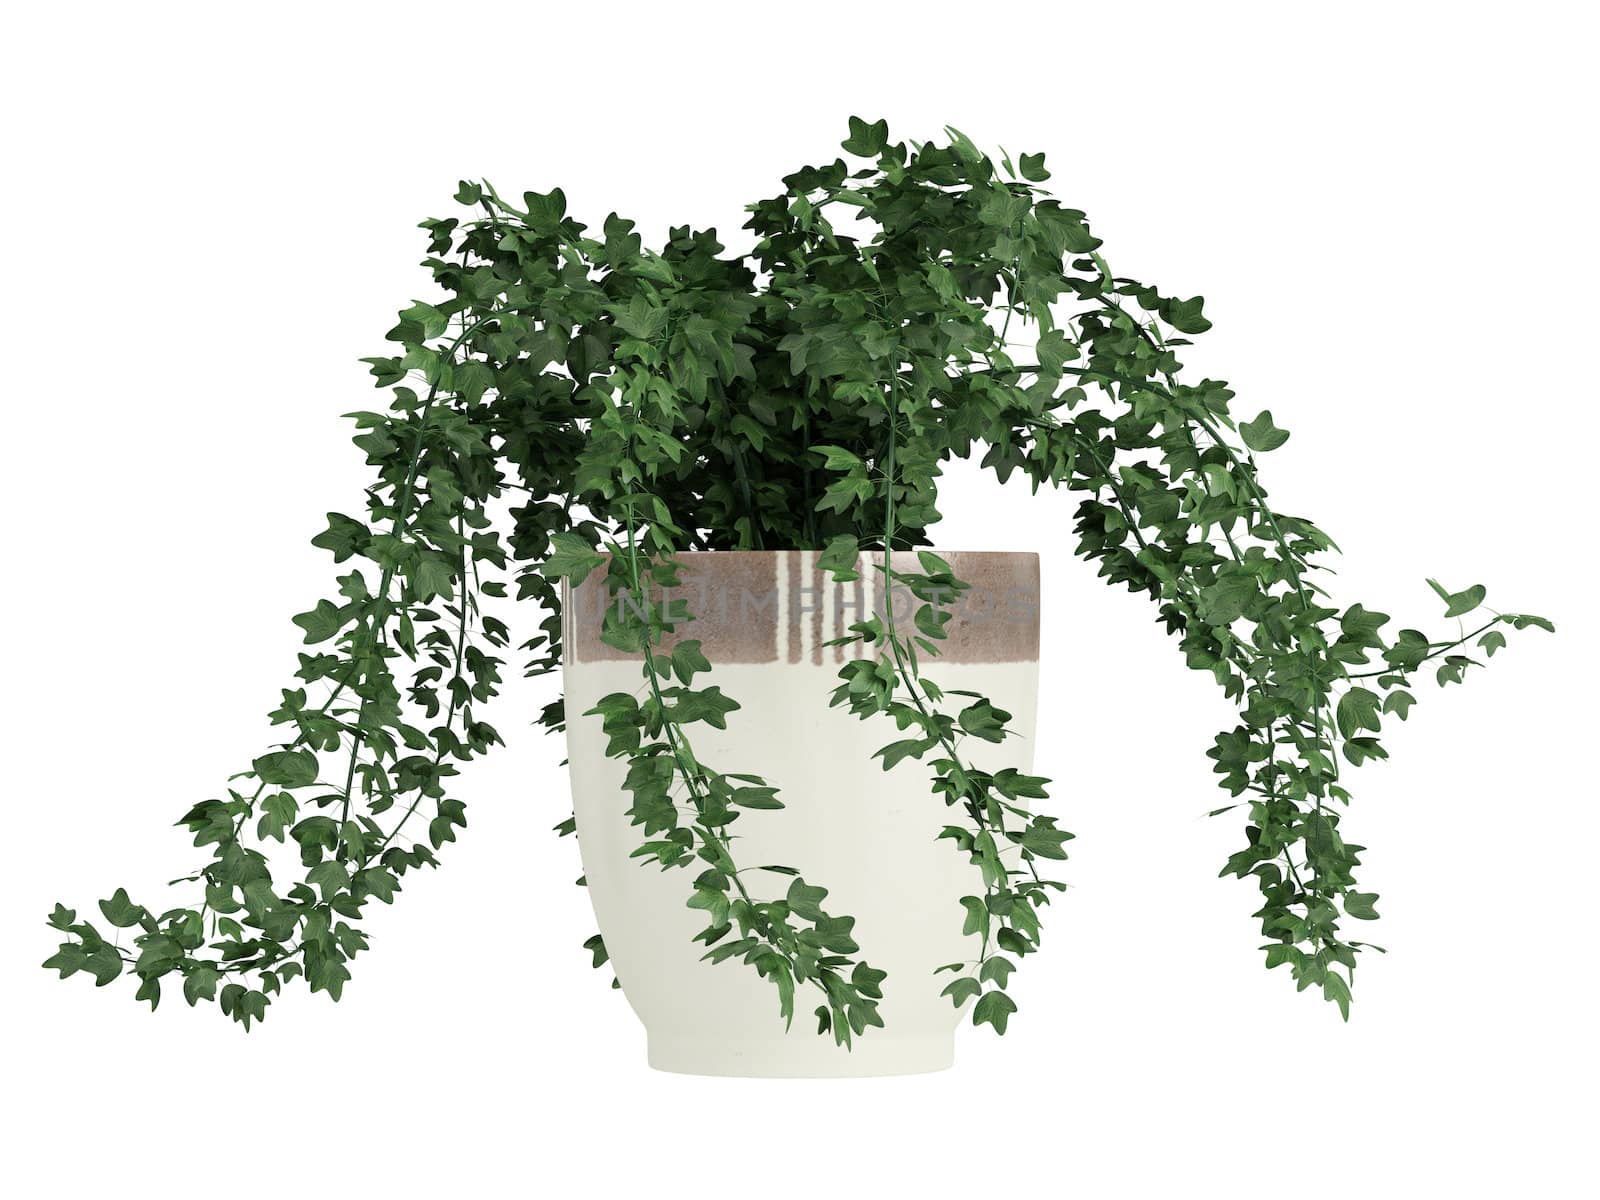 Potted ivy plant trailing over the edges of a ceramic a container for use indoors as a decorative houseplant isolated on white